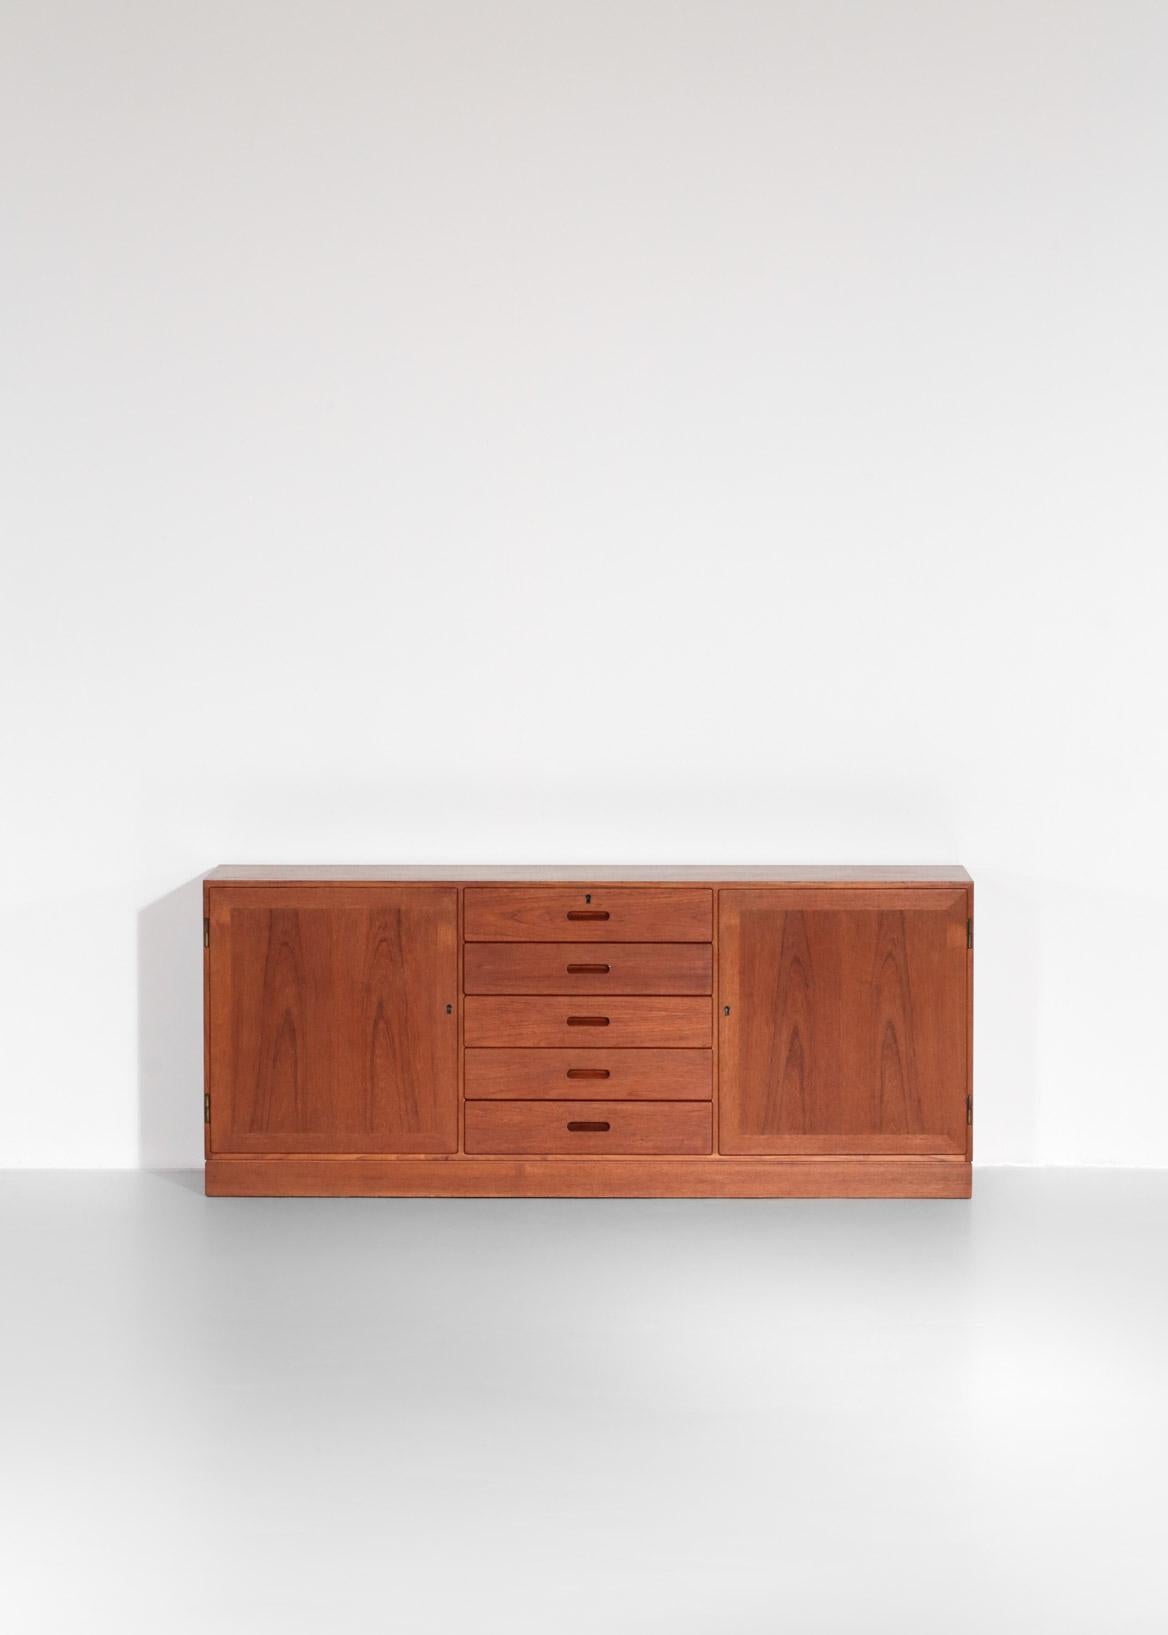 Danish sideboard designed by Kai Winding.
Made of teak with 2 doors and 6 drawers.
Can be wall mounted.